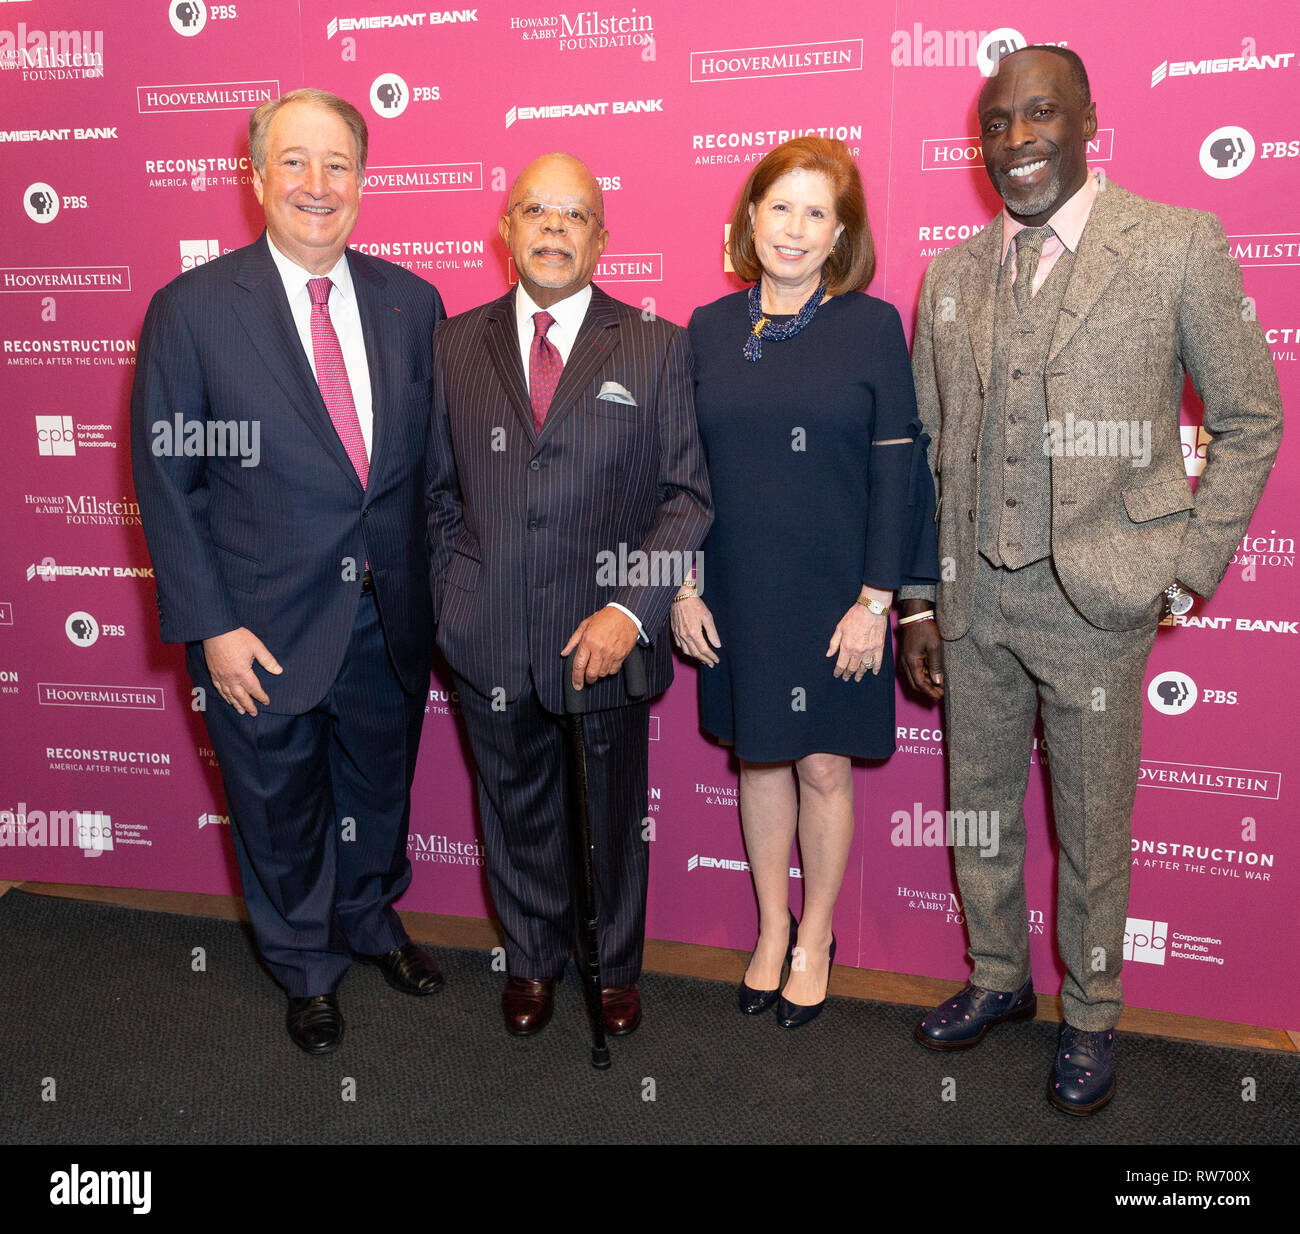 New York, NY - March 4, 2019: Howard Milstein, Henry Louis Gates Jr., Abby Milstein, Michael Kenneth Williams attend the Reconstruction: America After The Civil War premiere at New York Historical Society Stock Photo